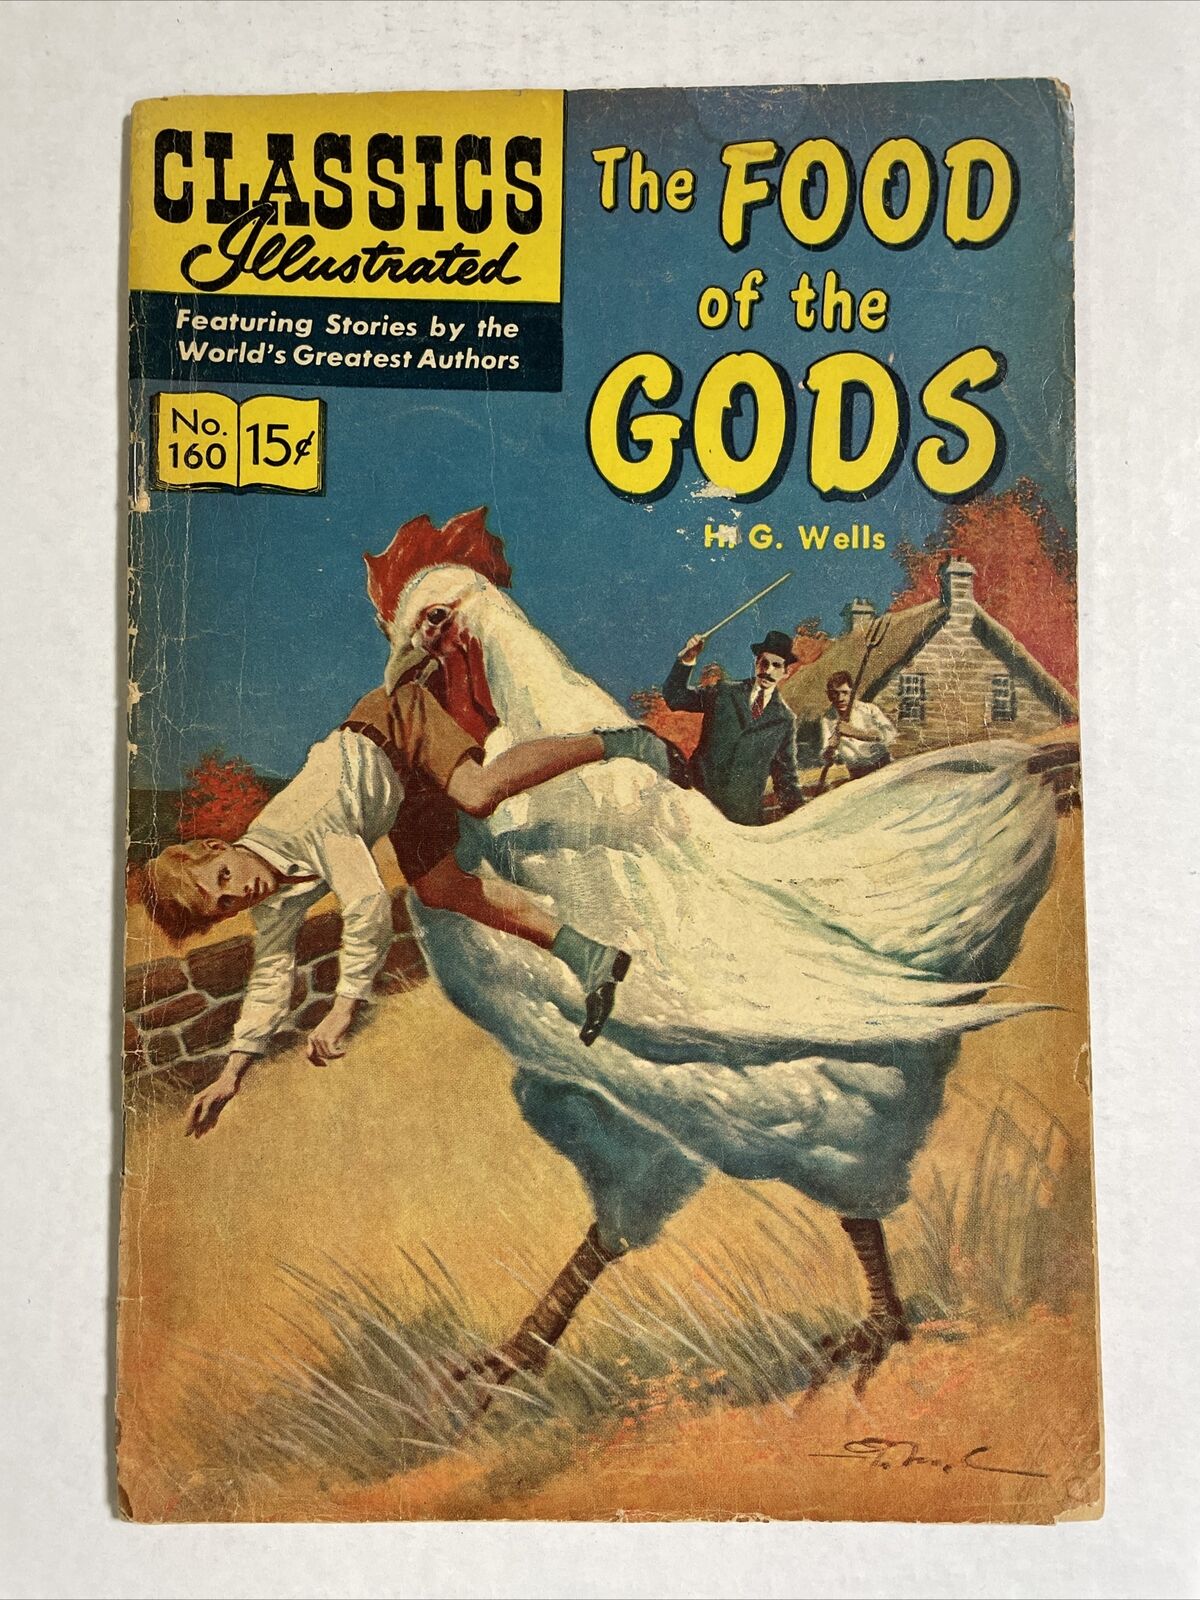 Classics Illustrated Food of the Gods 160 HRN 159 1st edition 1961 HG Wells